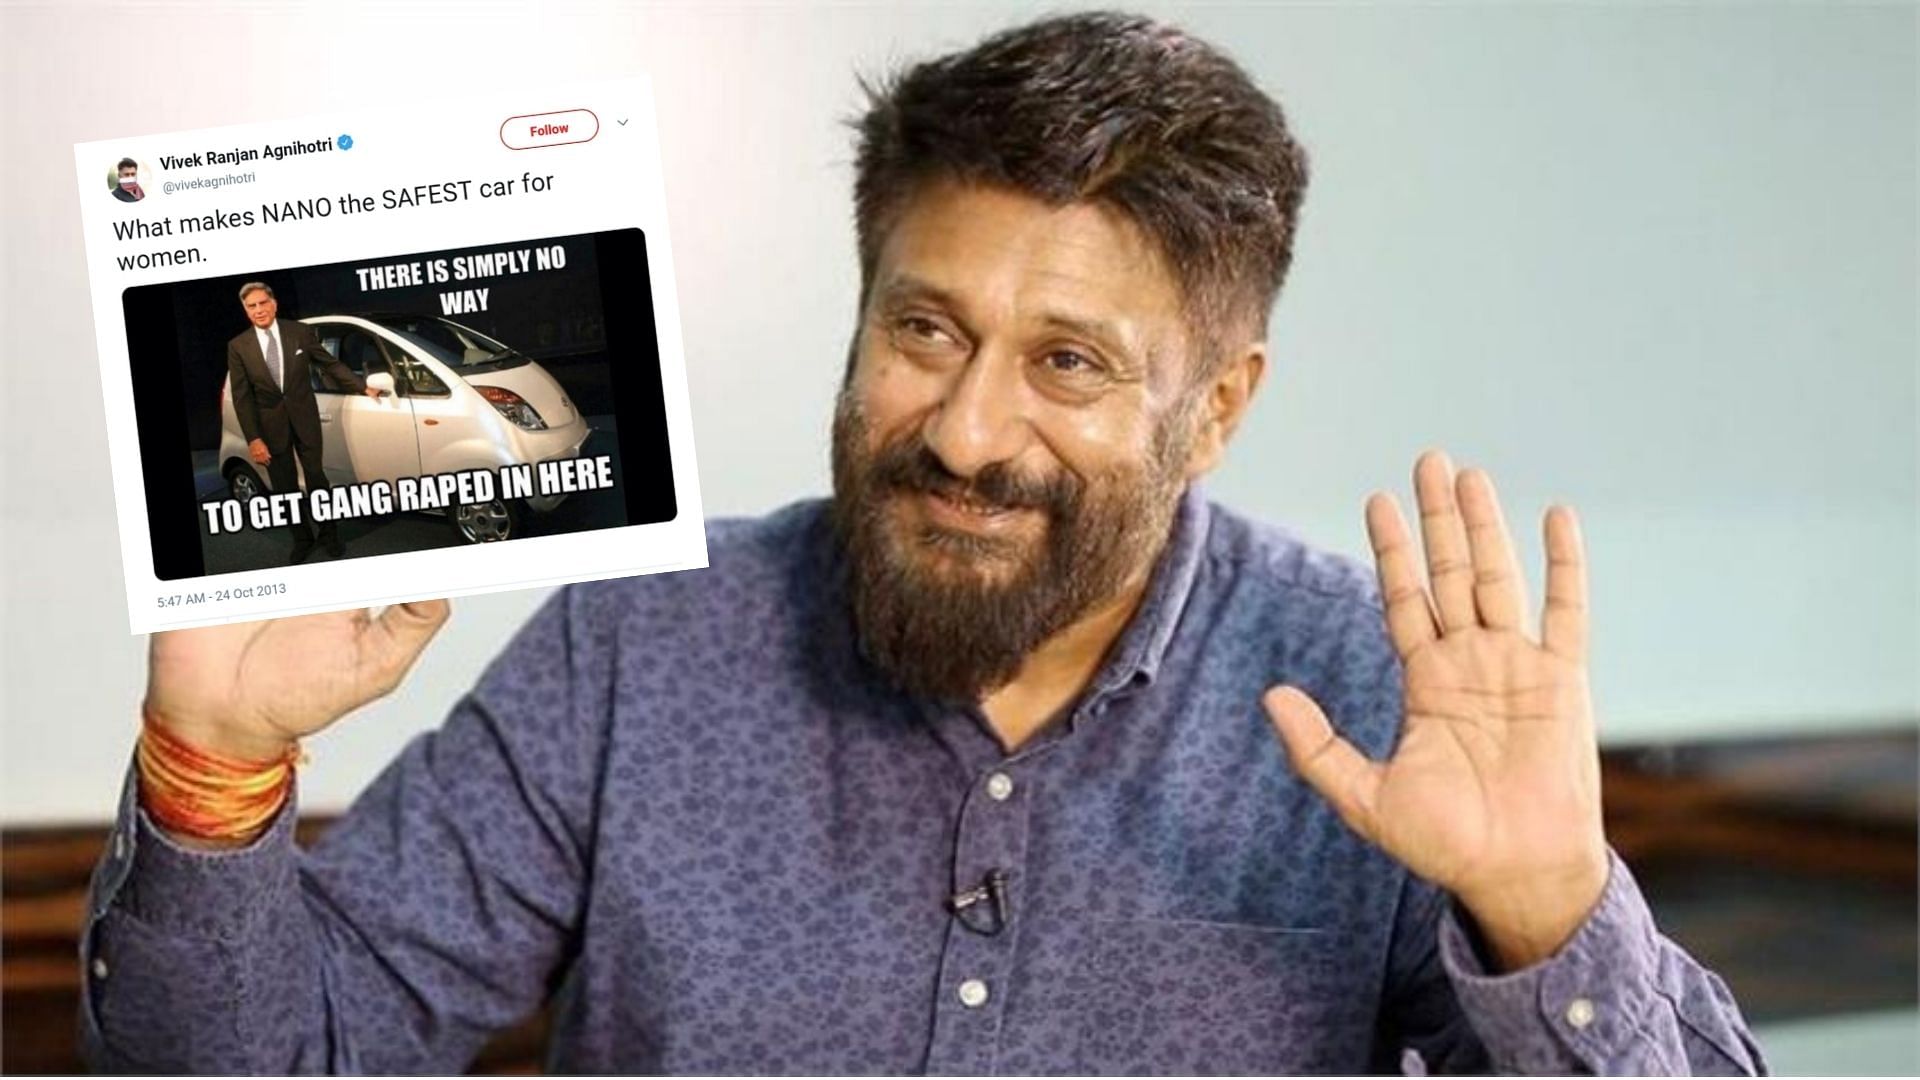 Vivek Agnihotri’s old sexist and misogynistic tweets resurface on social media after his appointment to ICCR.